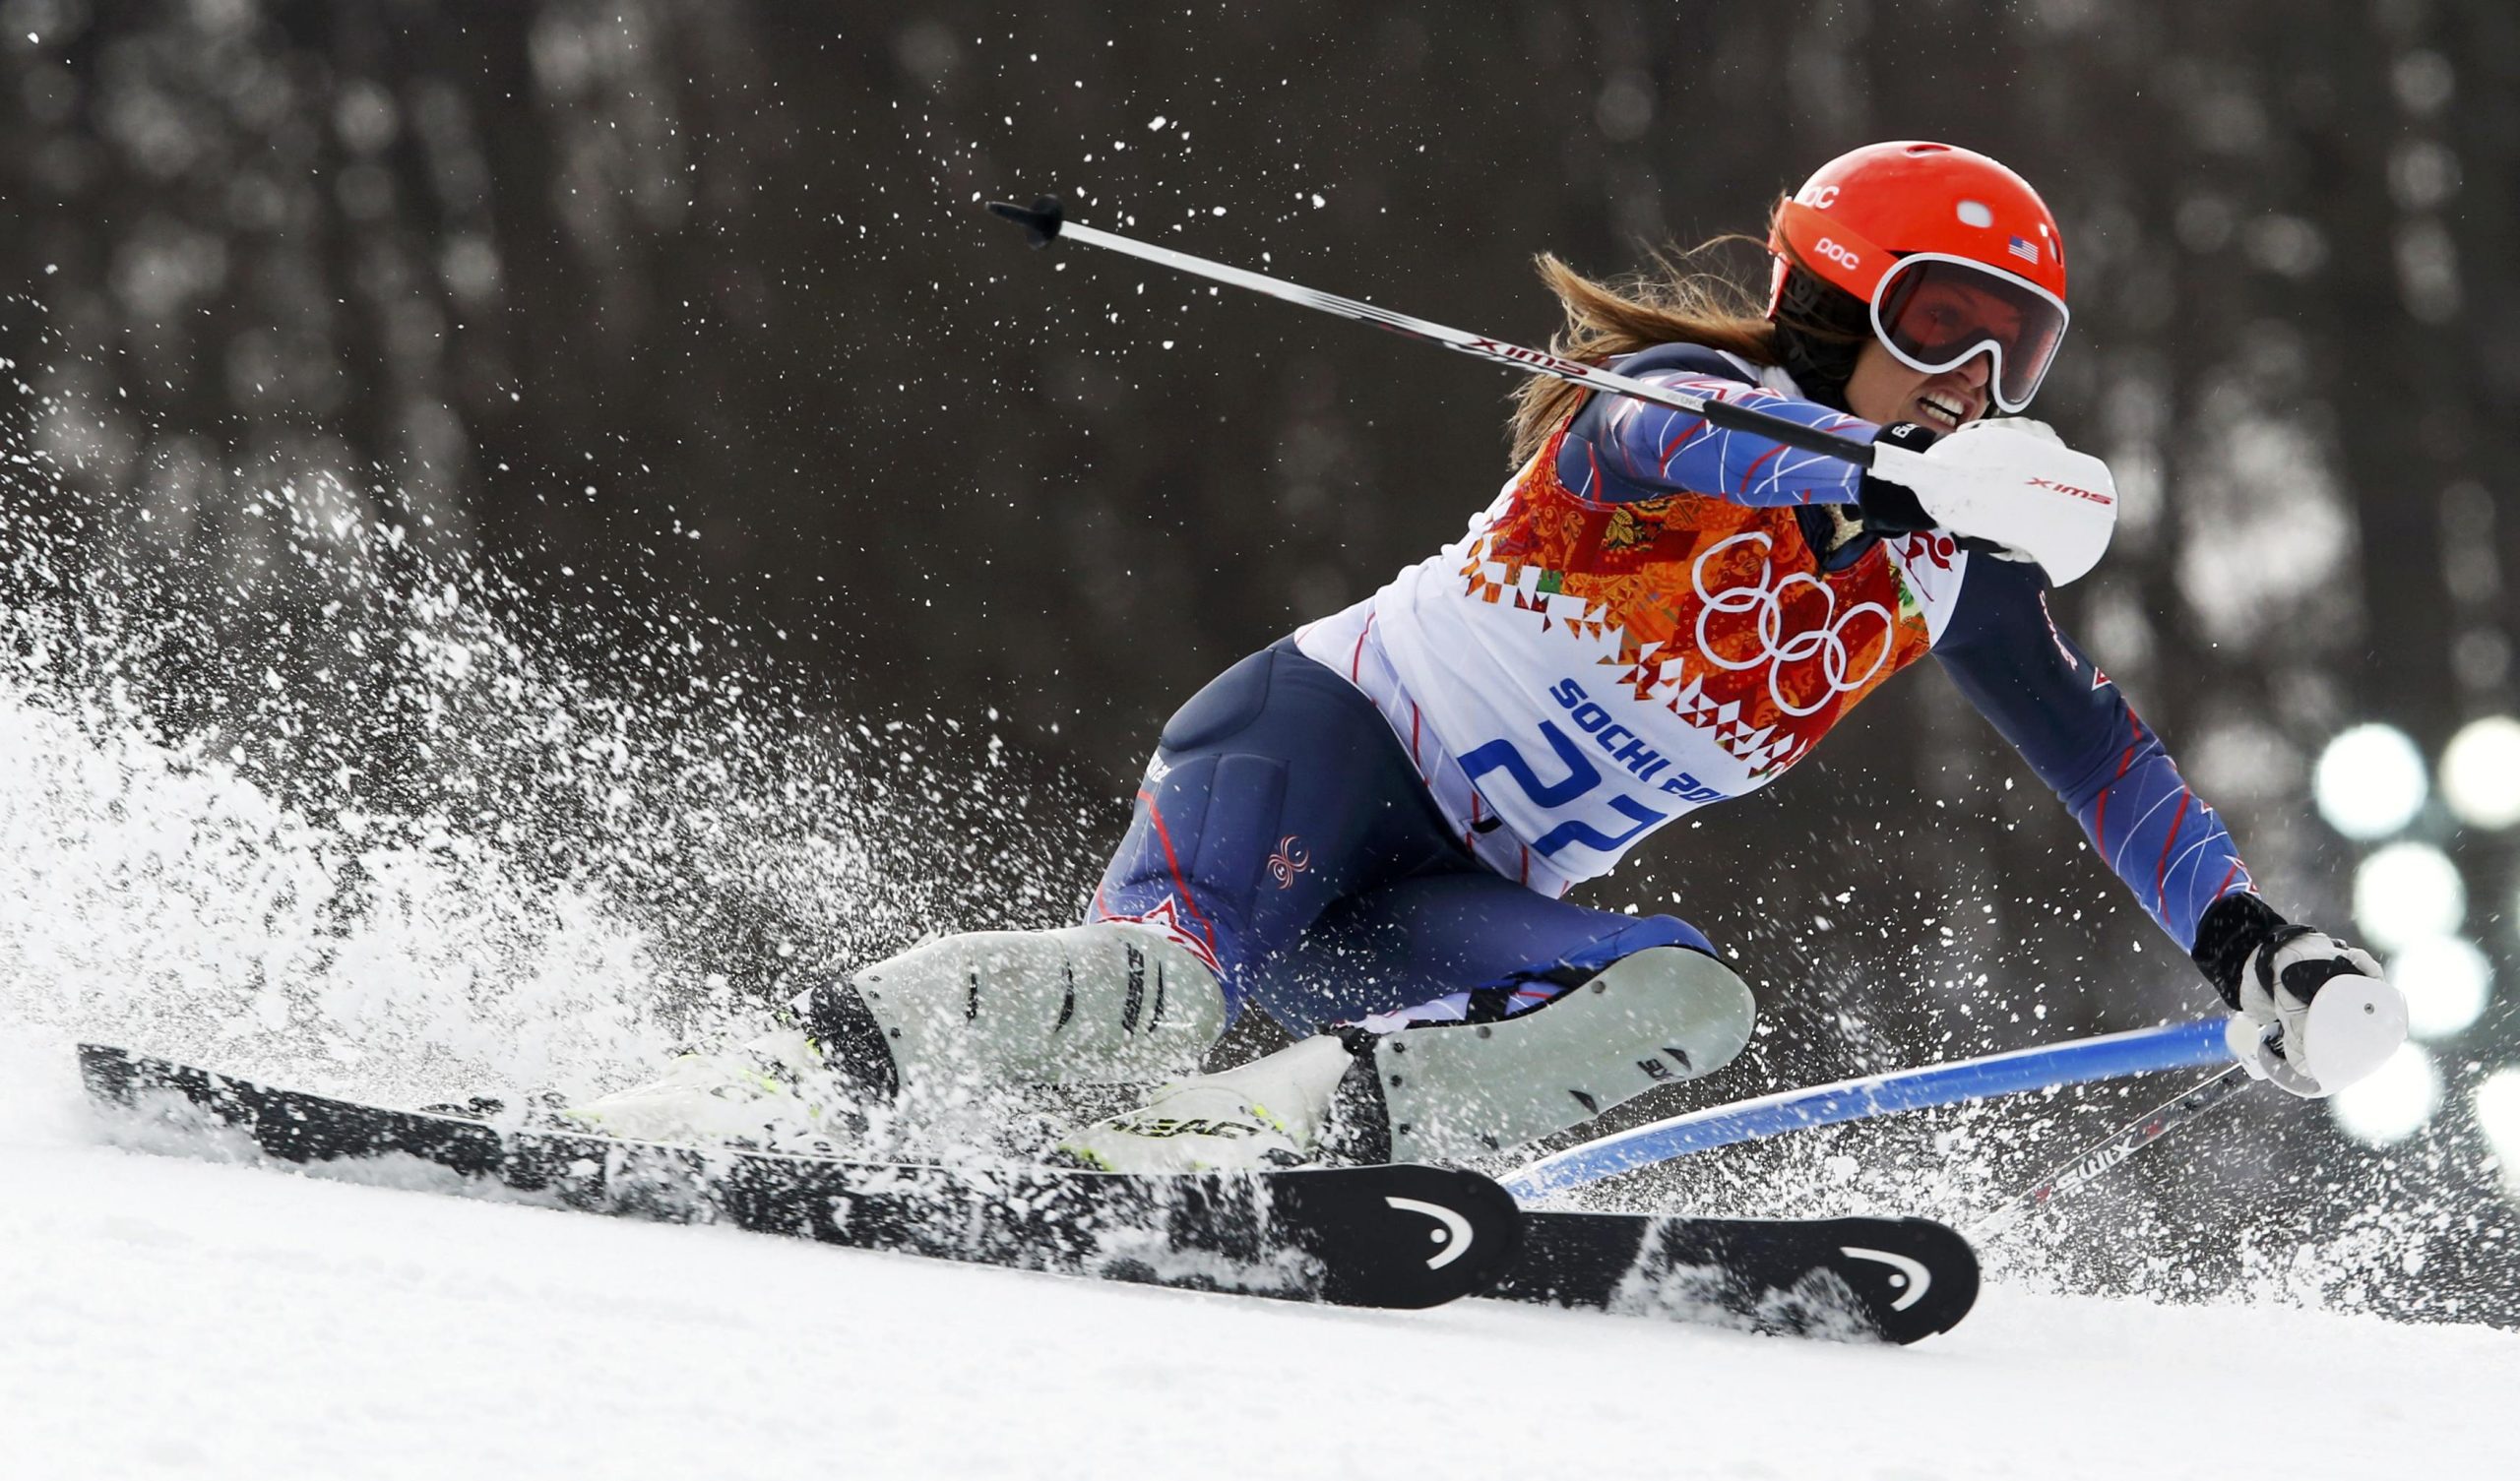 Mancuso of the U.S. competes in the slalom run of the women's alpine skiing super combined event at the 2014 Sochi Winter Olympics